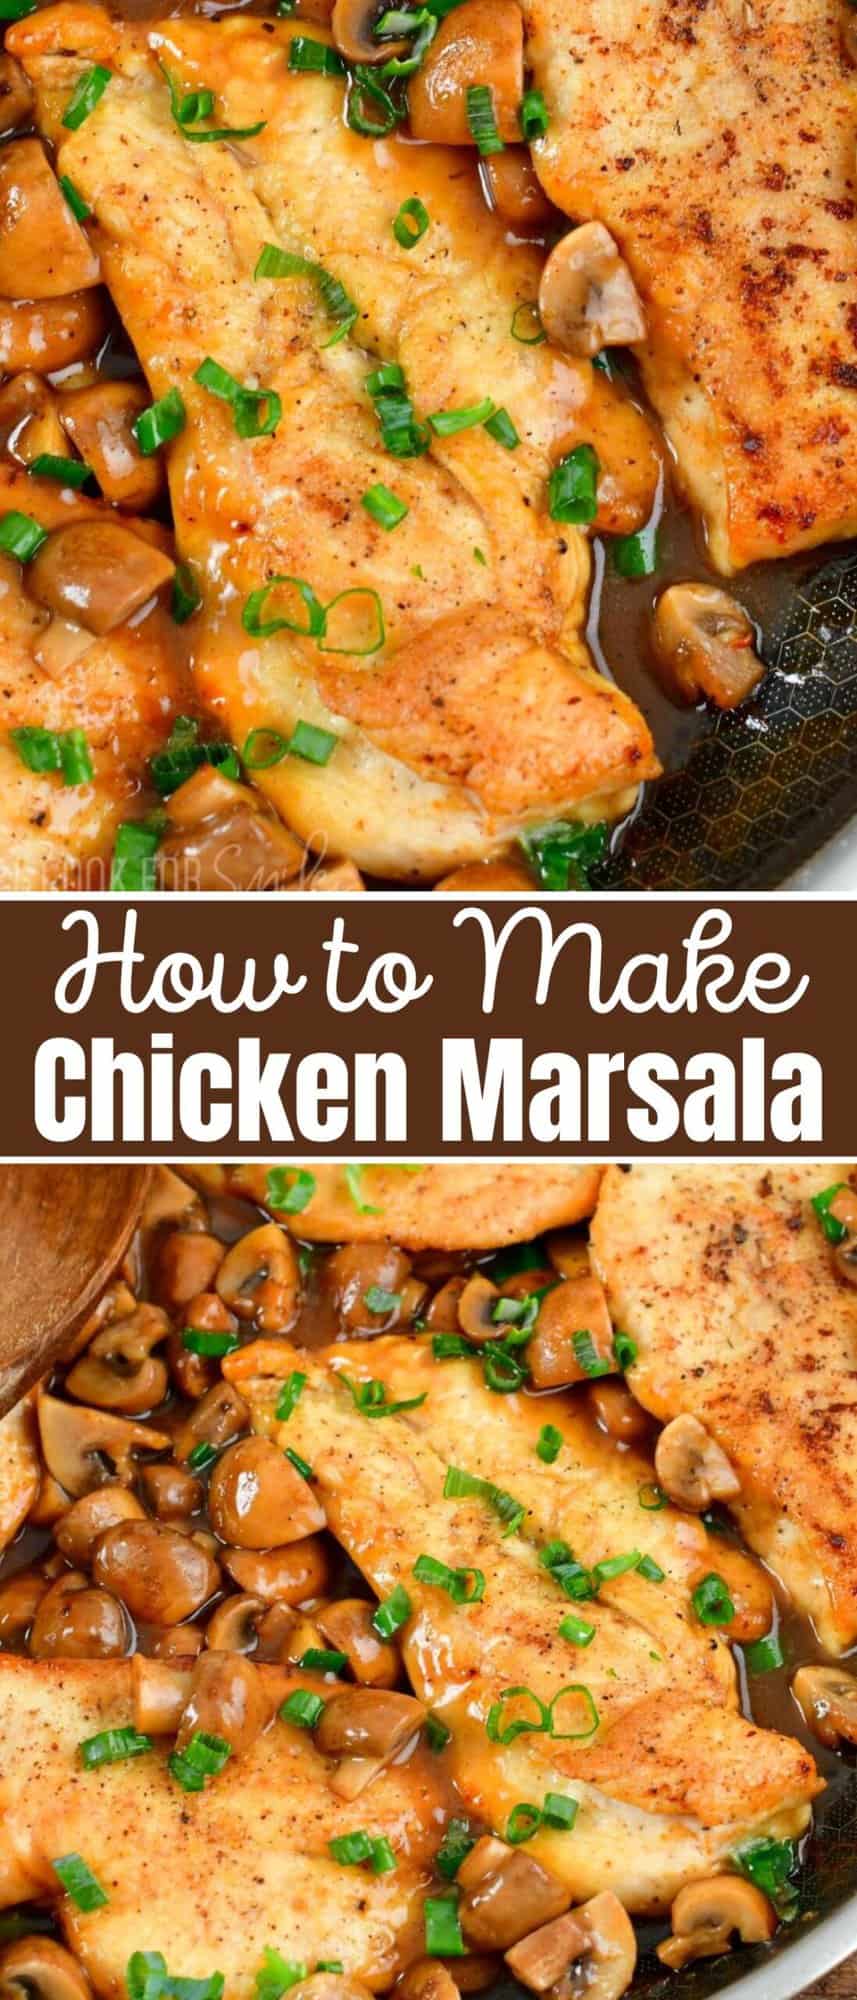 Chicken Marsala - Will Cook For Smiles